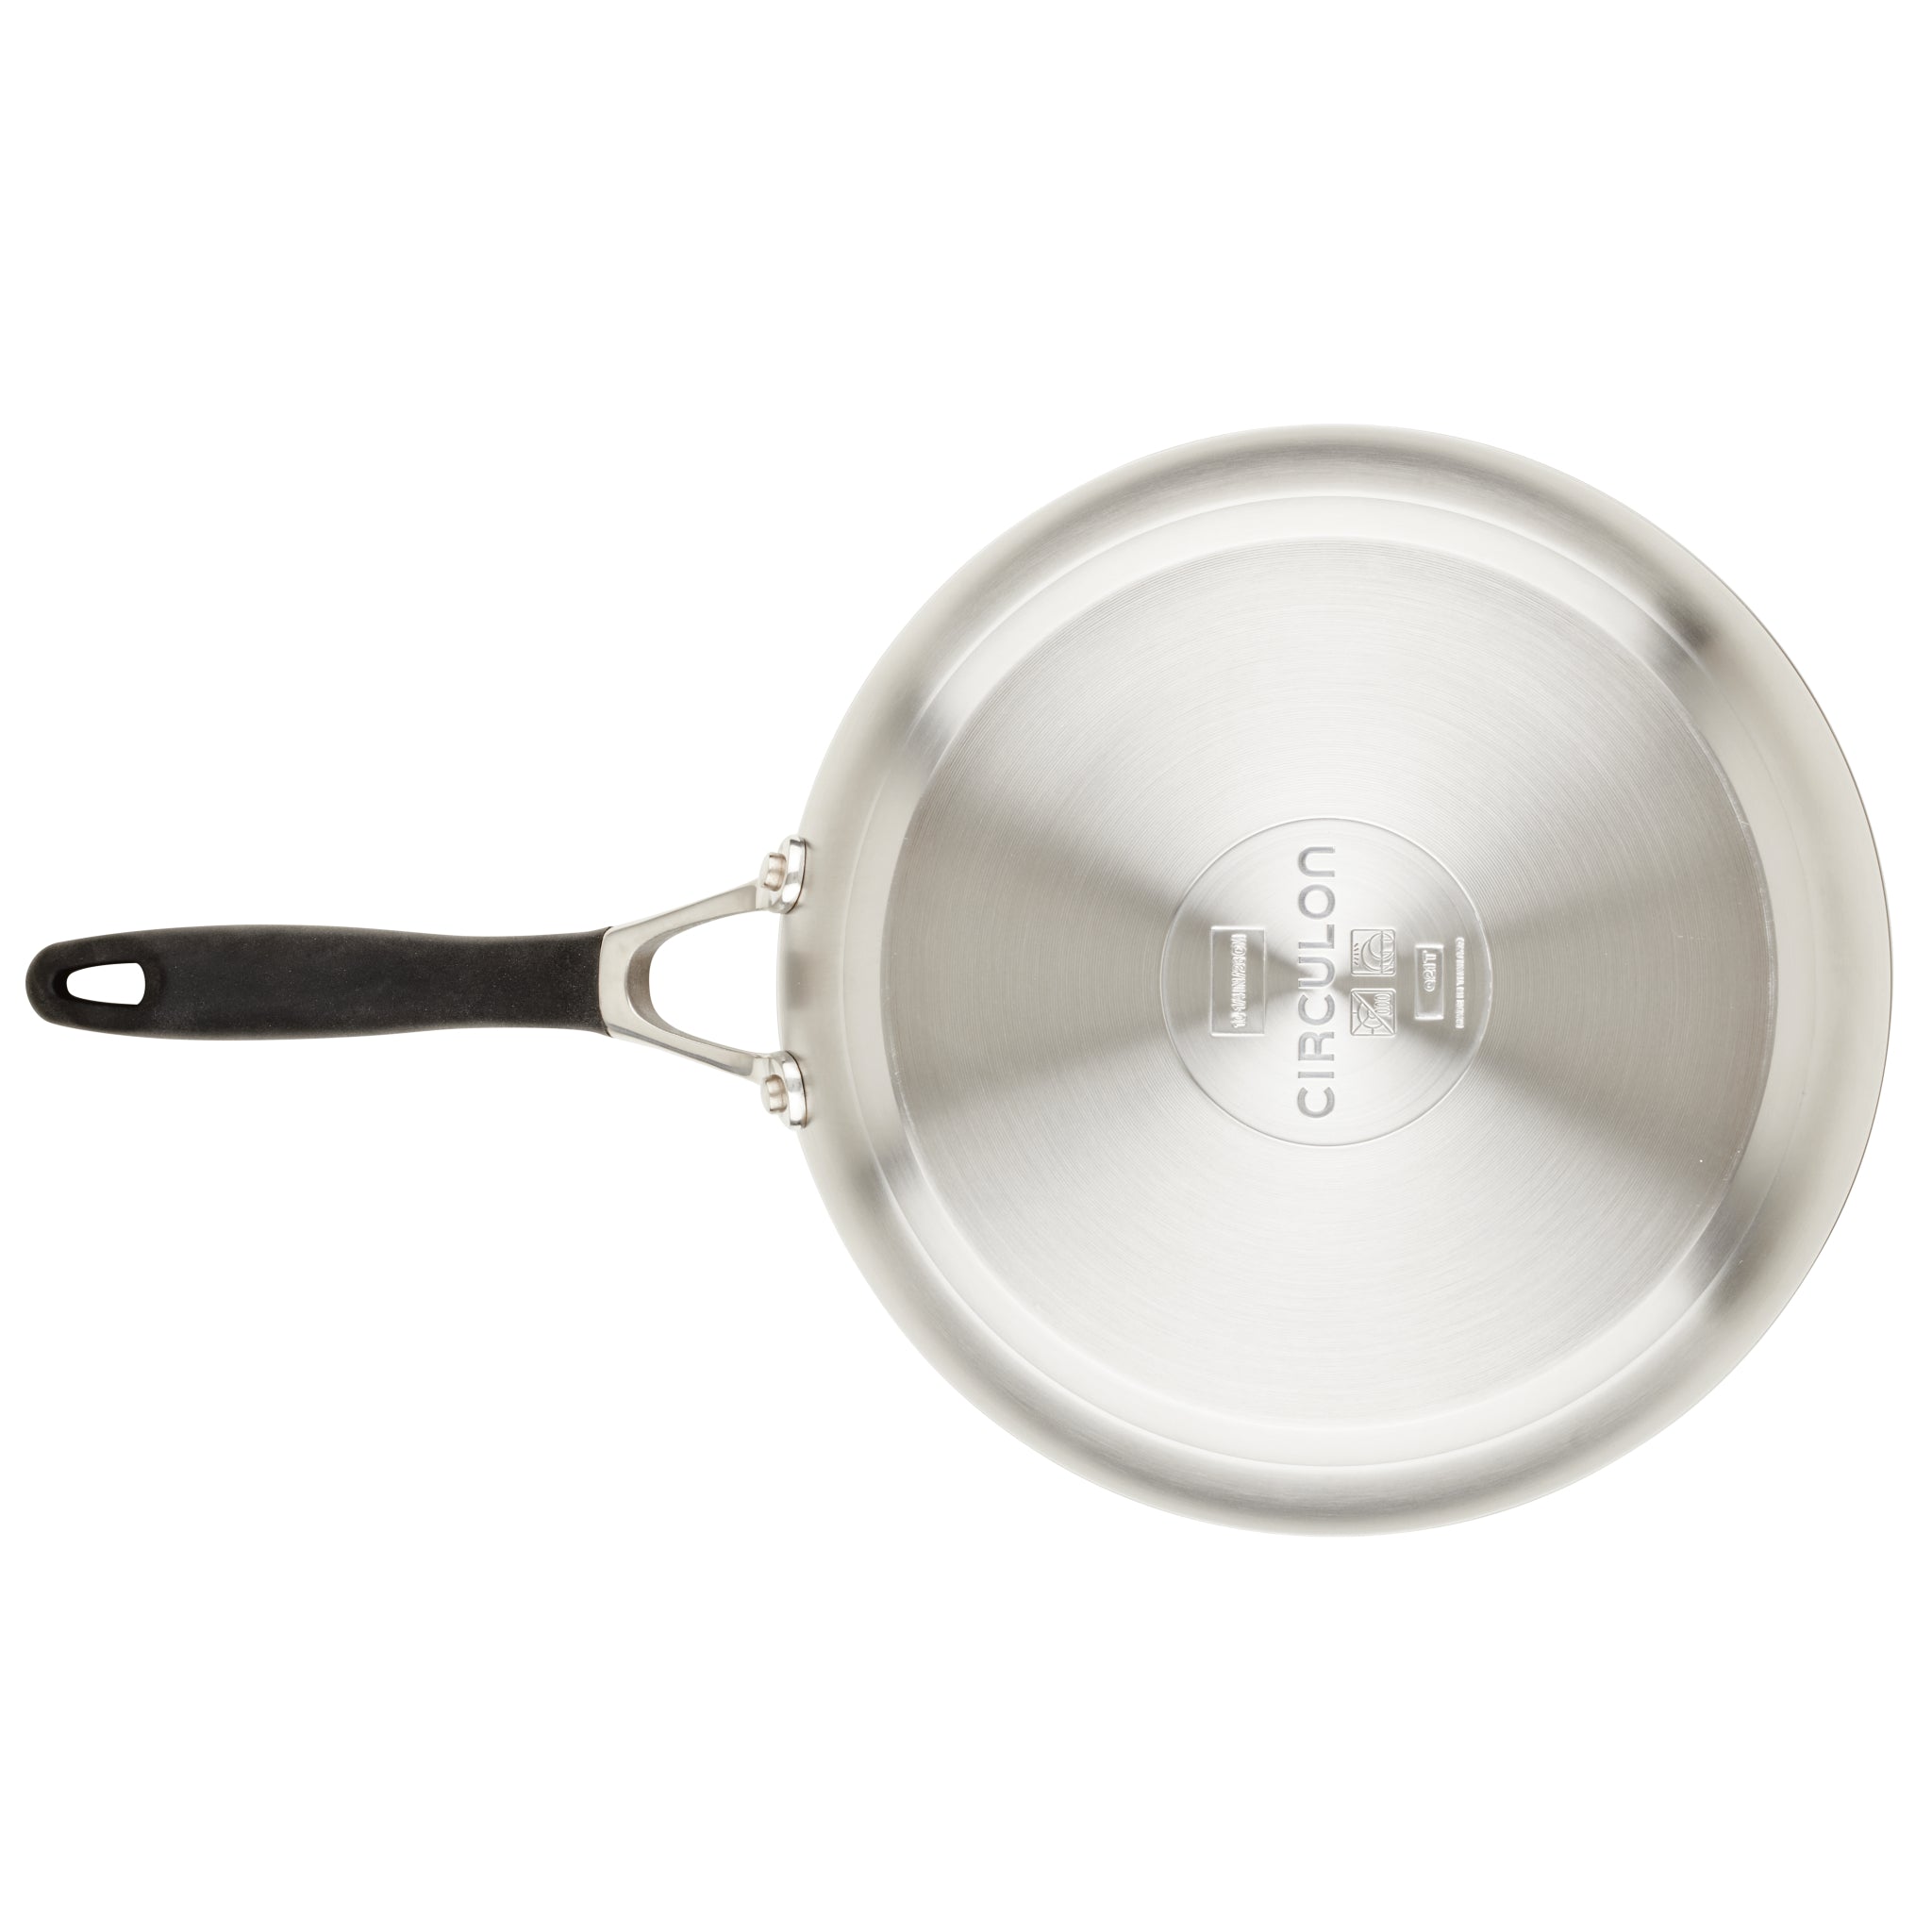 Circulon Clad Stainless Steel Stir Fry Pan with Hybrid SteelShield, 12.5  Inch, Silver & Reviews